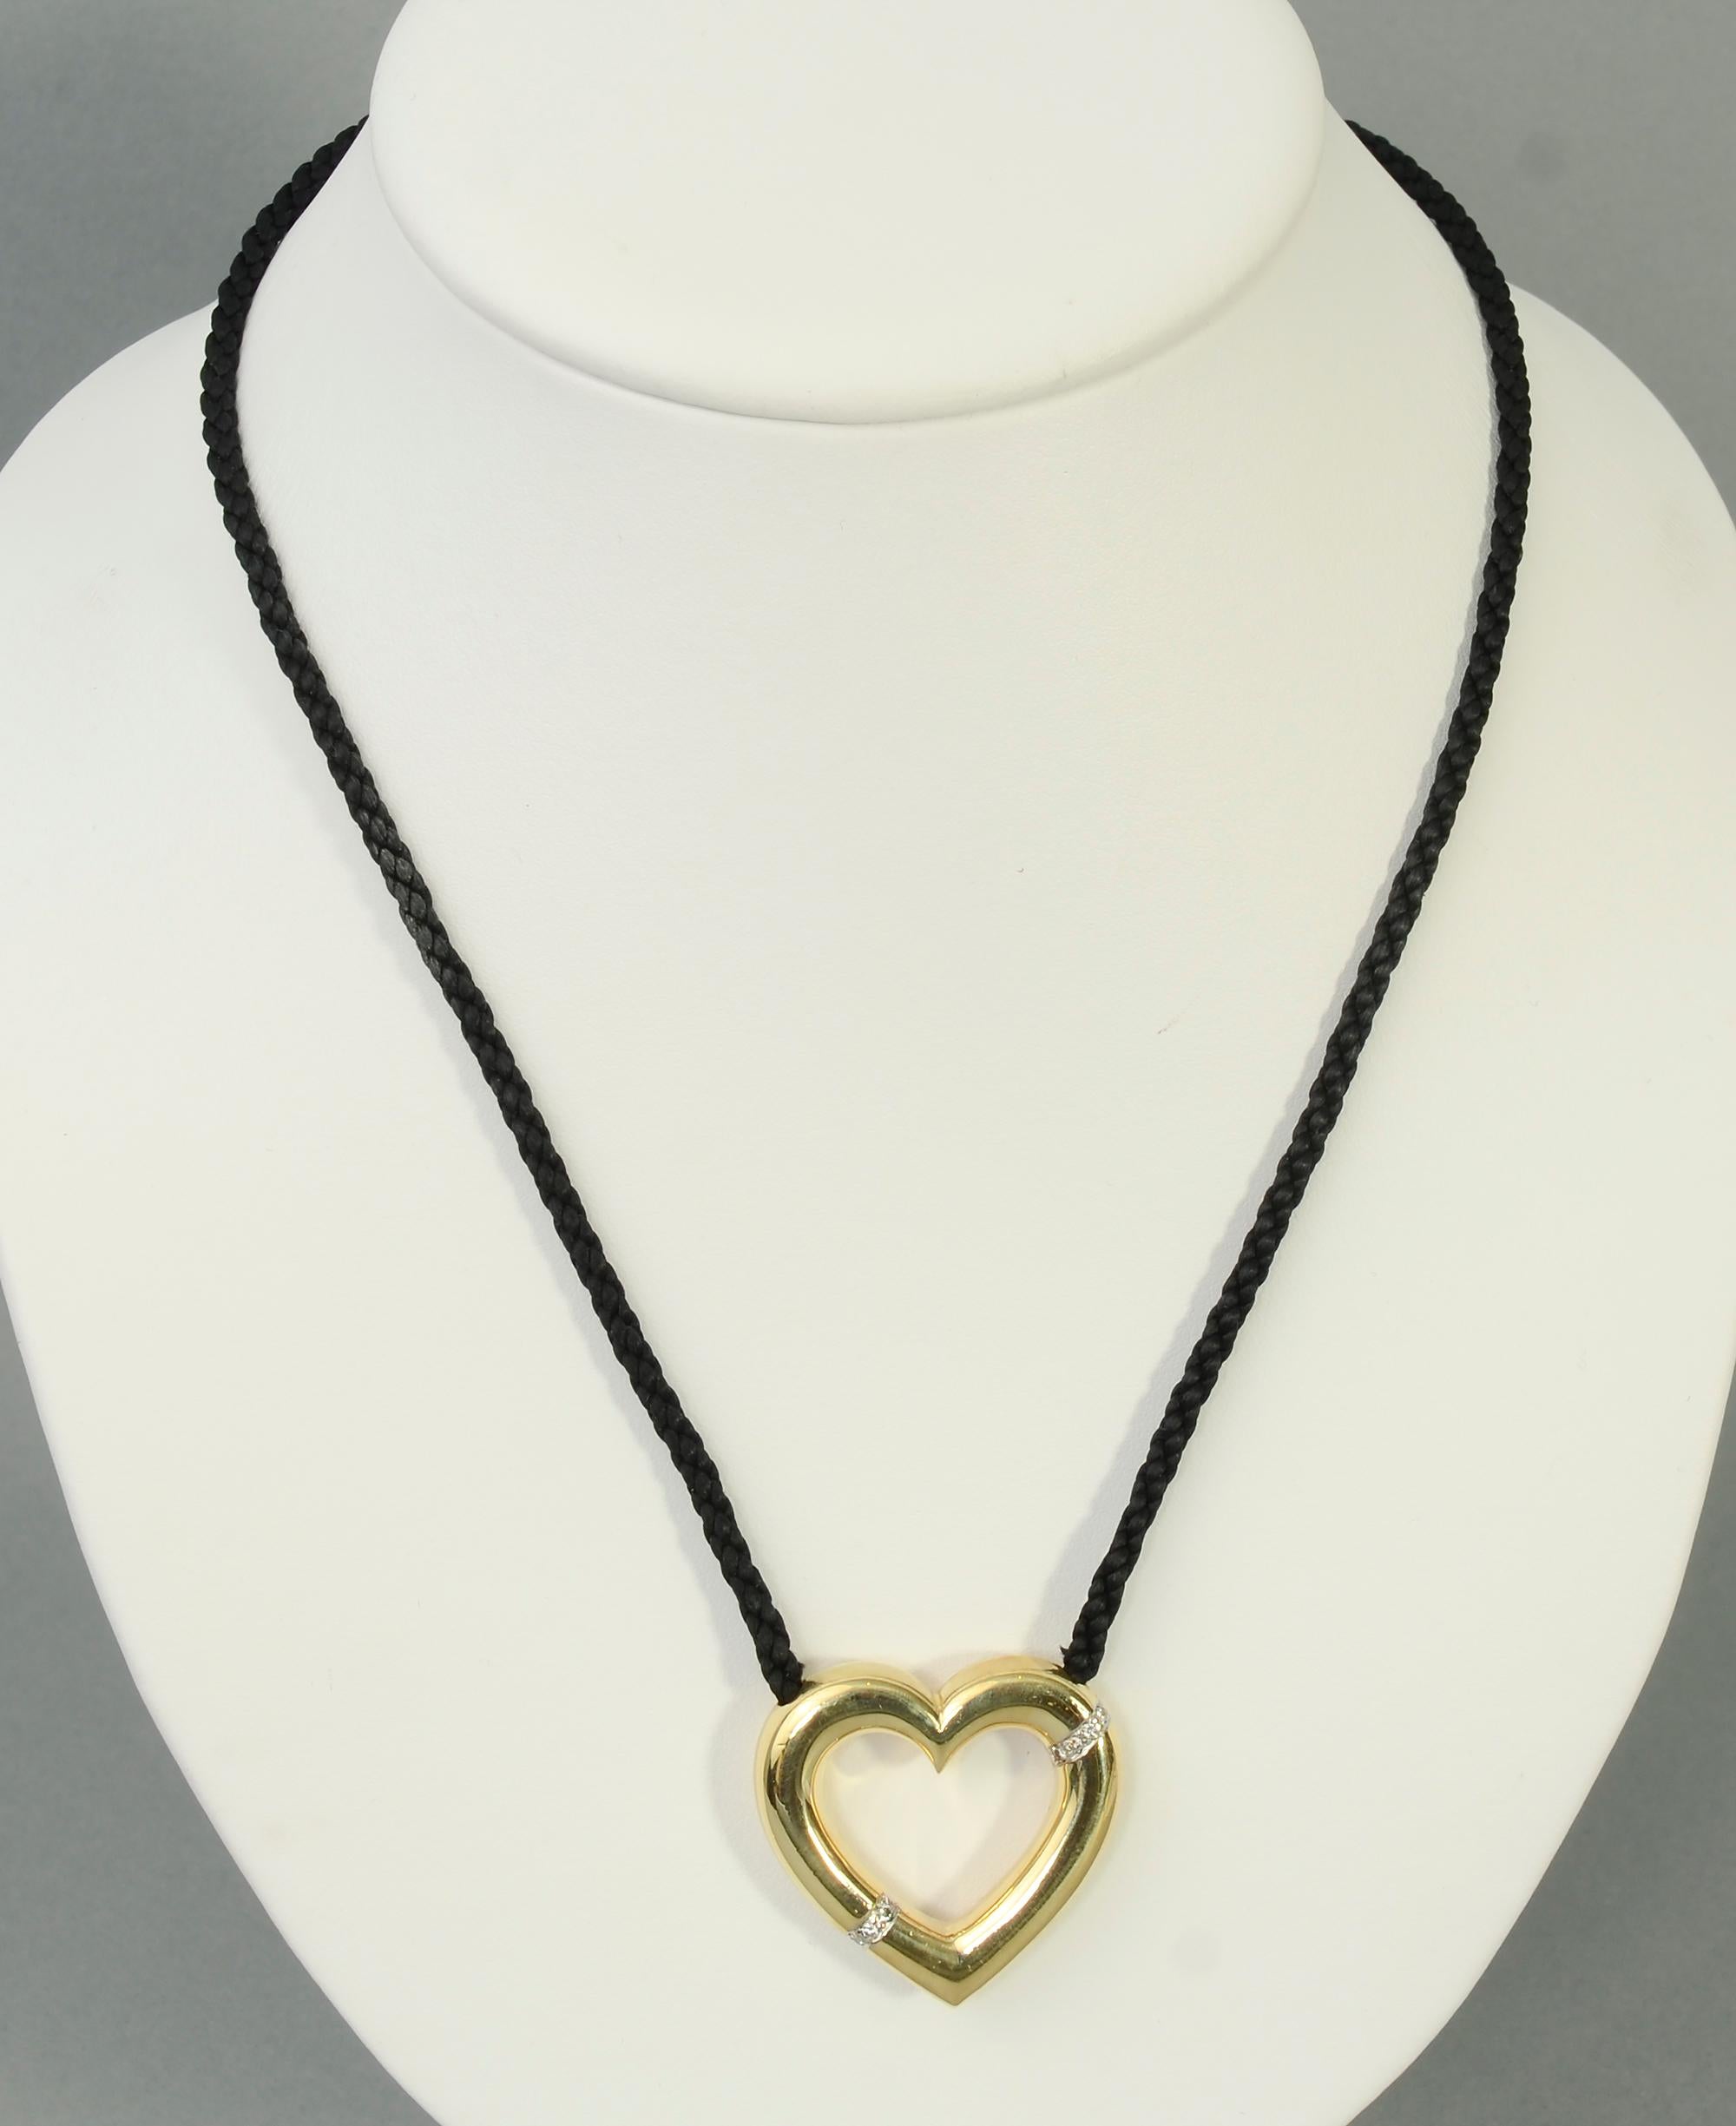 Paloma Picasso for Tiffany open heart gold pendant with diamonds. It is on a black cord of adjustable length with gold ball tips. The necklace can be as long as 34 1/2 inches. The heart measures 1 1/4 inches  in width and length. Dated 1981.